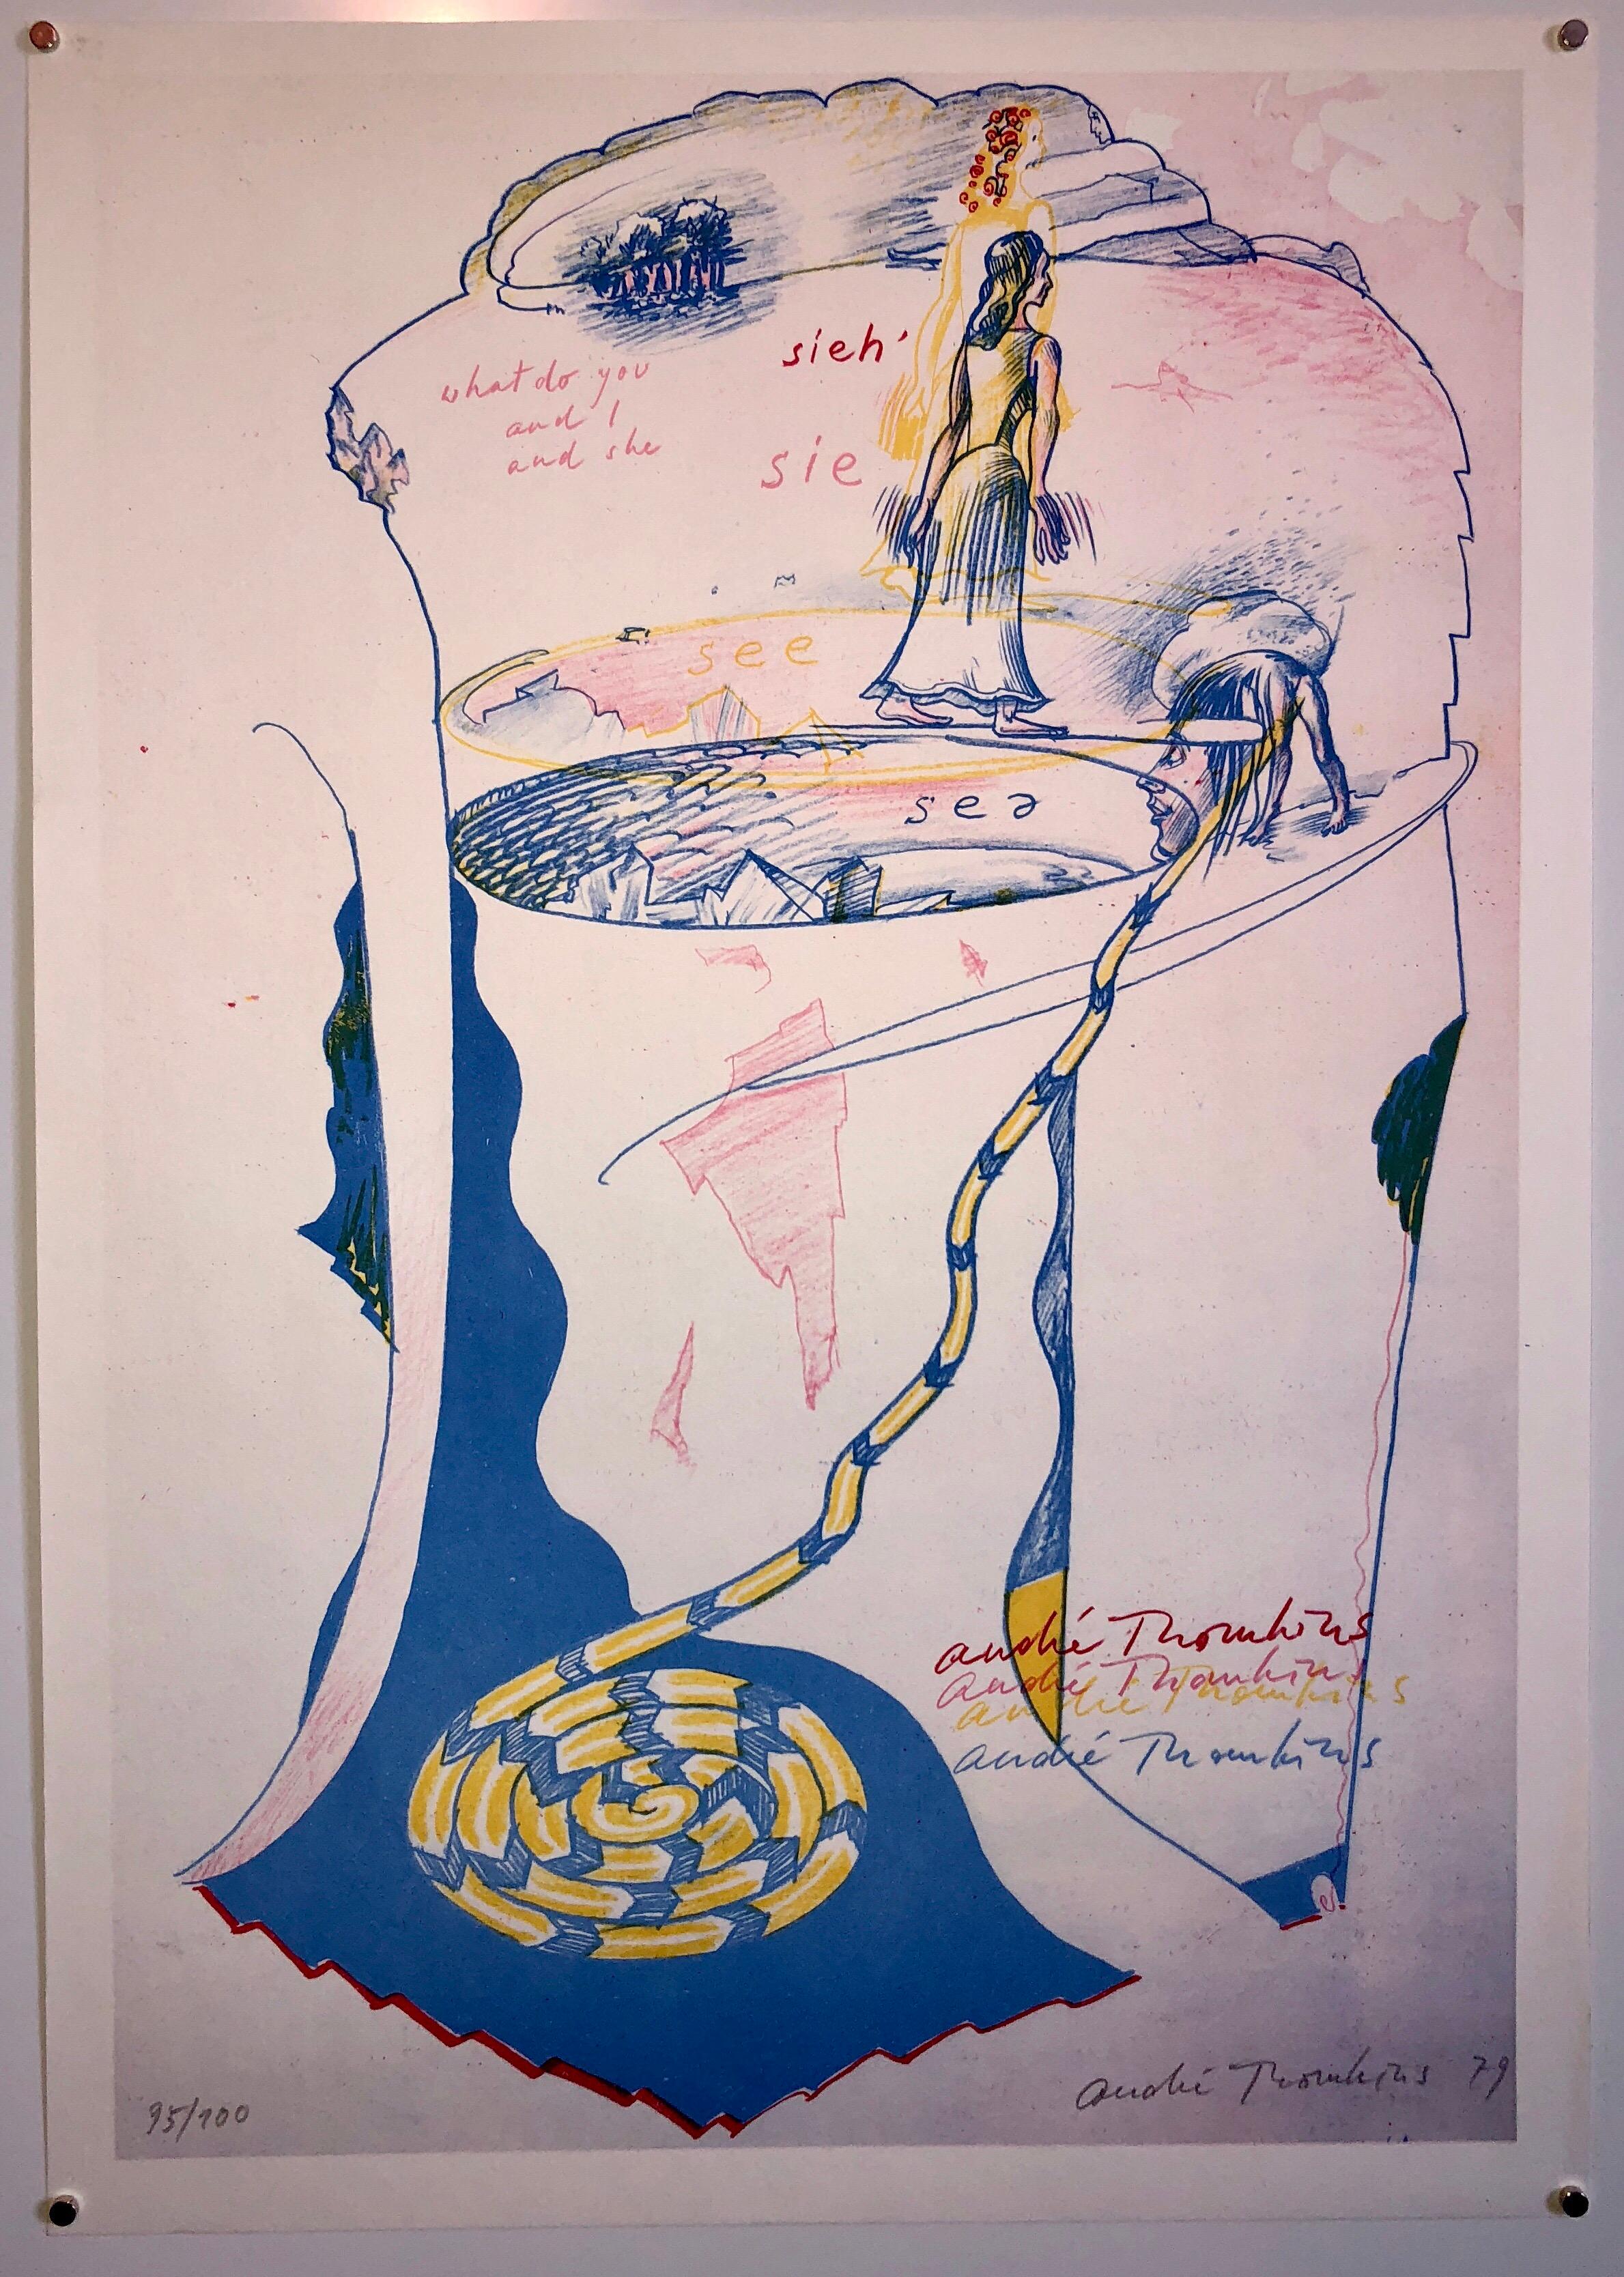 1970s Modernist Swiss Colorful Surrealism Signed Dada Lithograph Andre Thomkins - Surrealist Print by André Thomkins